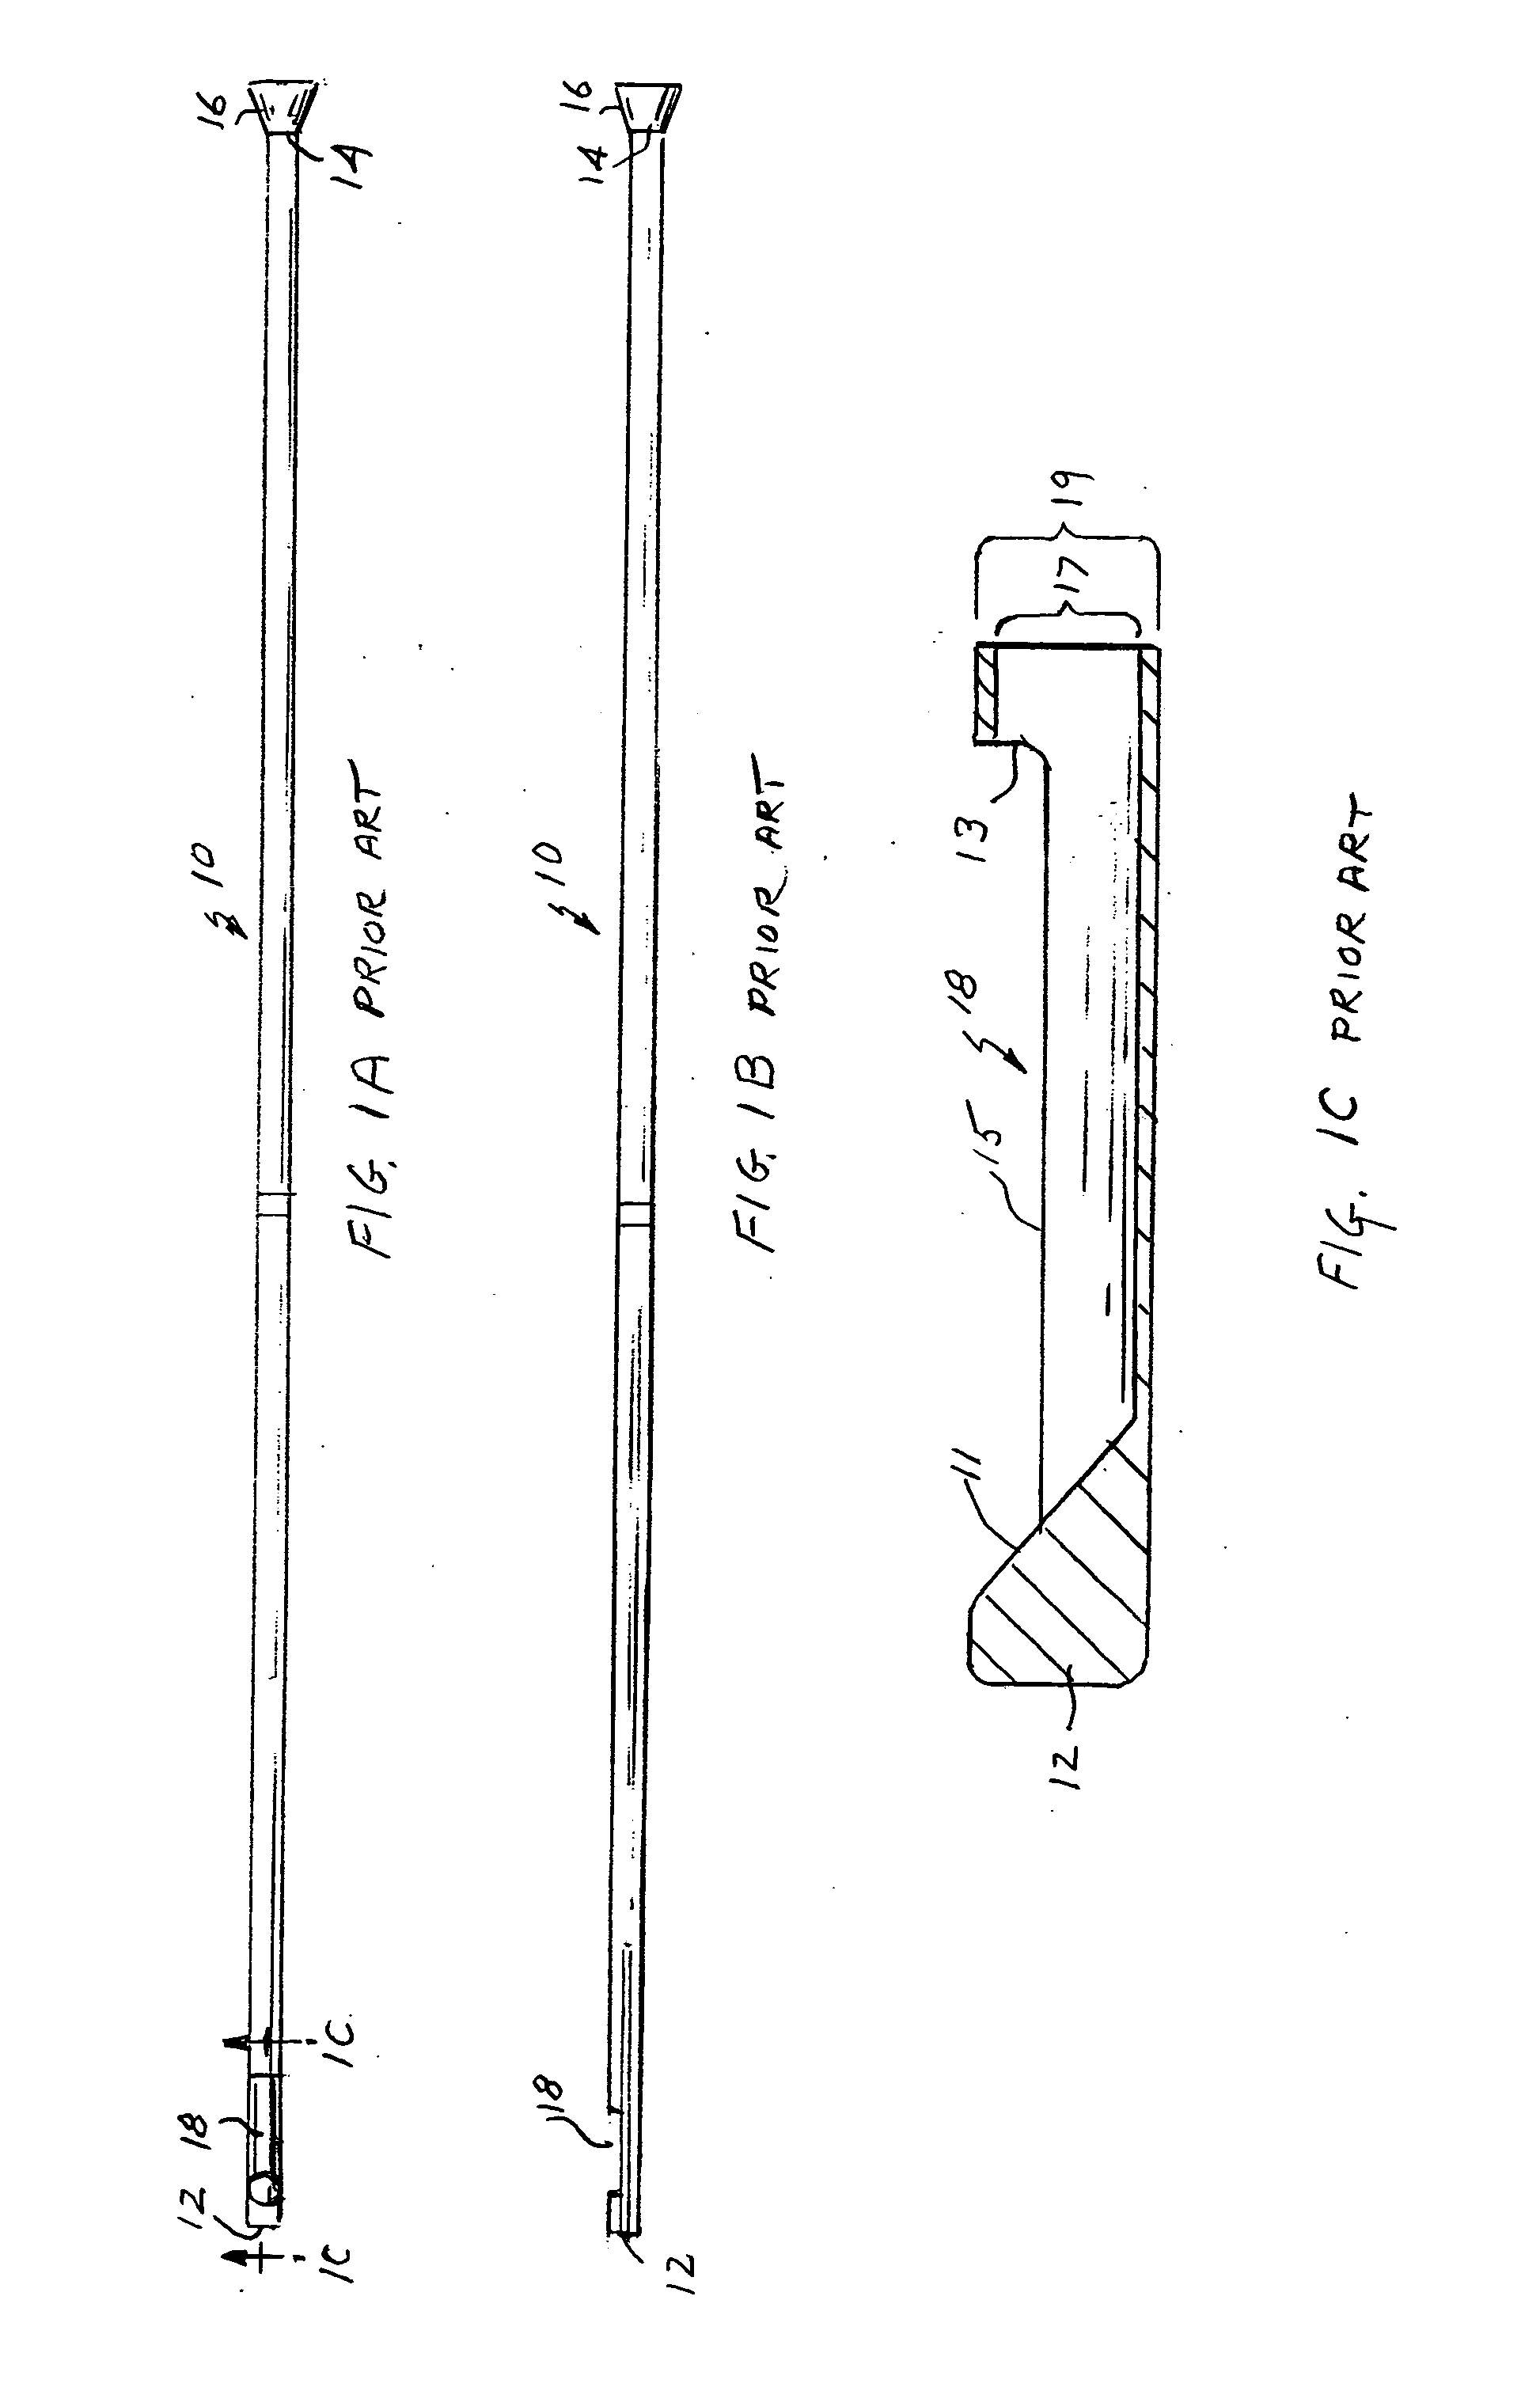 Tooling apparatuses and processes for providing precision shapes in medical catheters